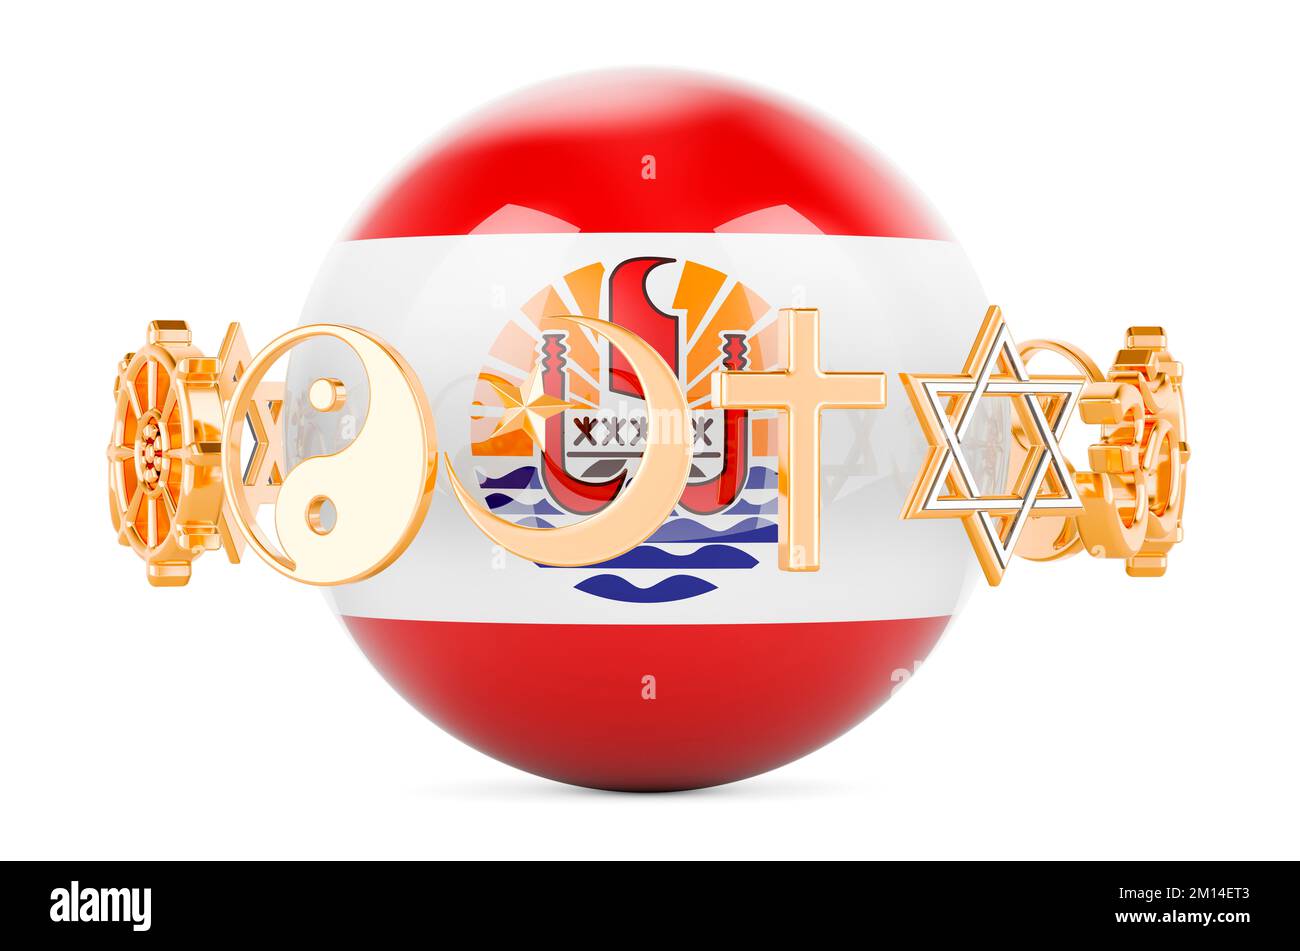 French Polynesian flag painted on sphere with religions symbols around, 3D rendering isolated on white background Stock Photo